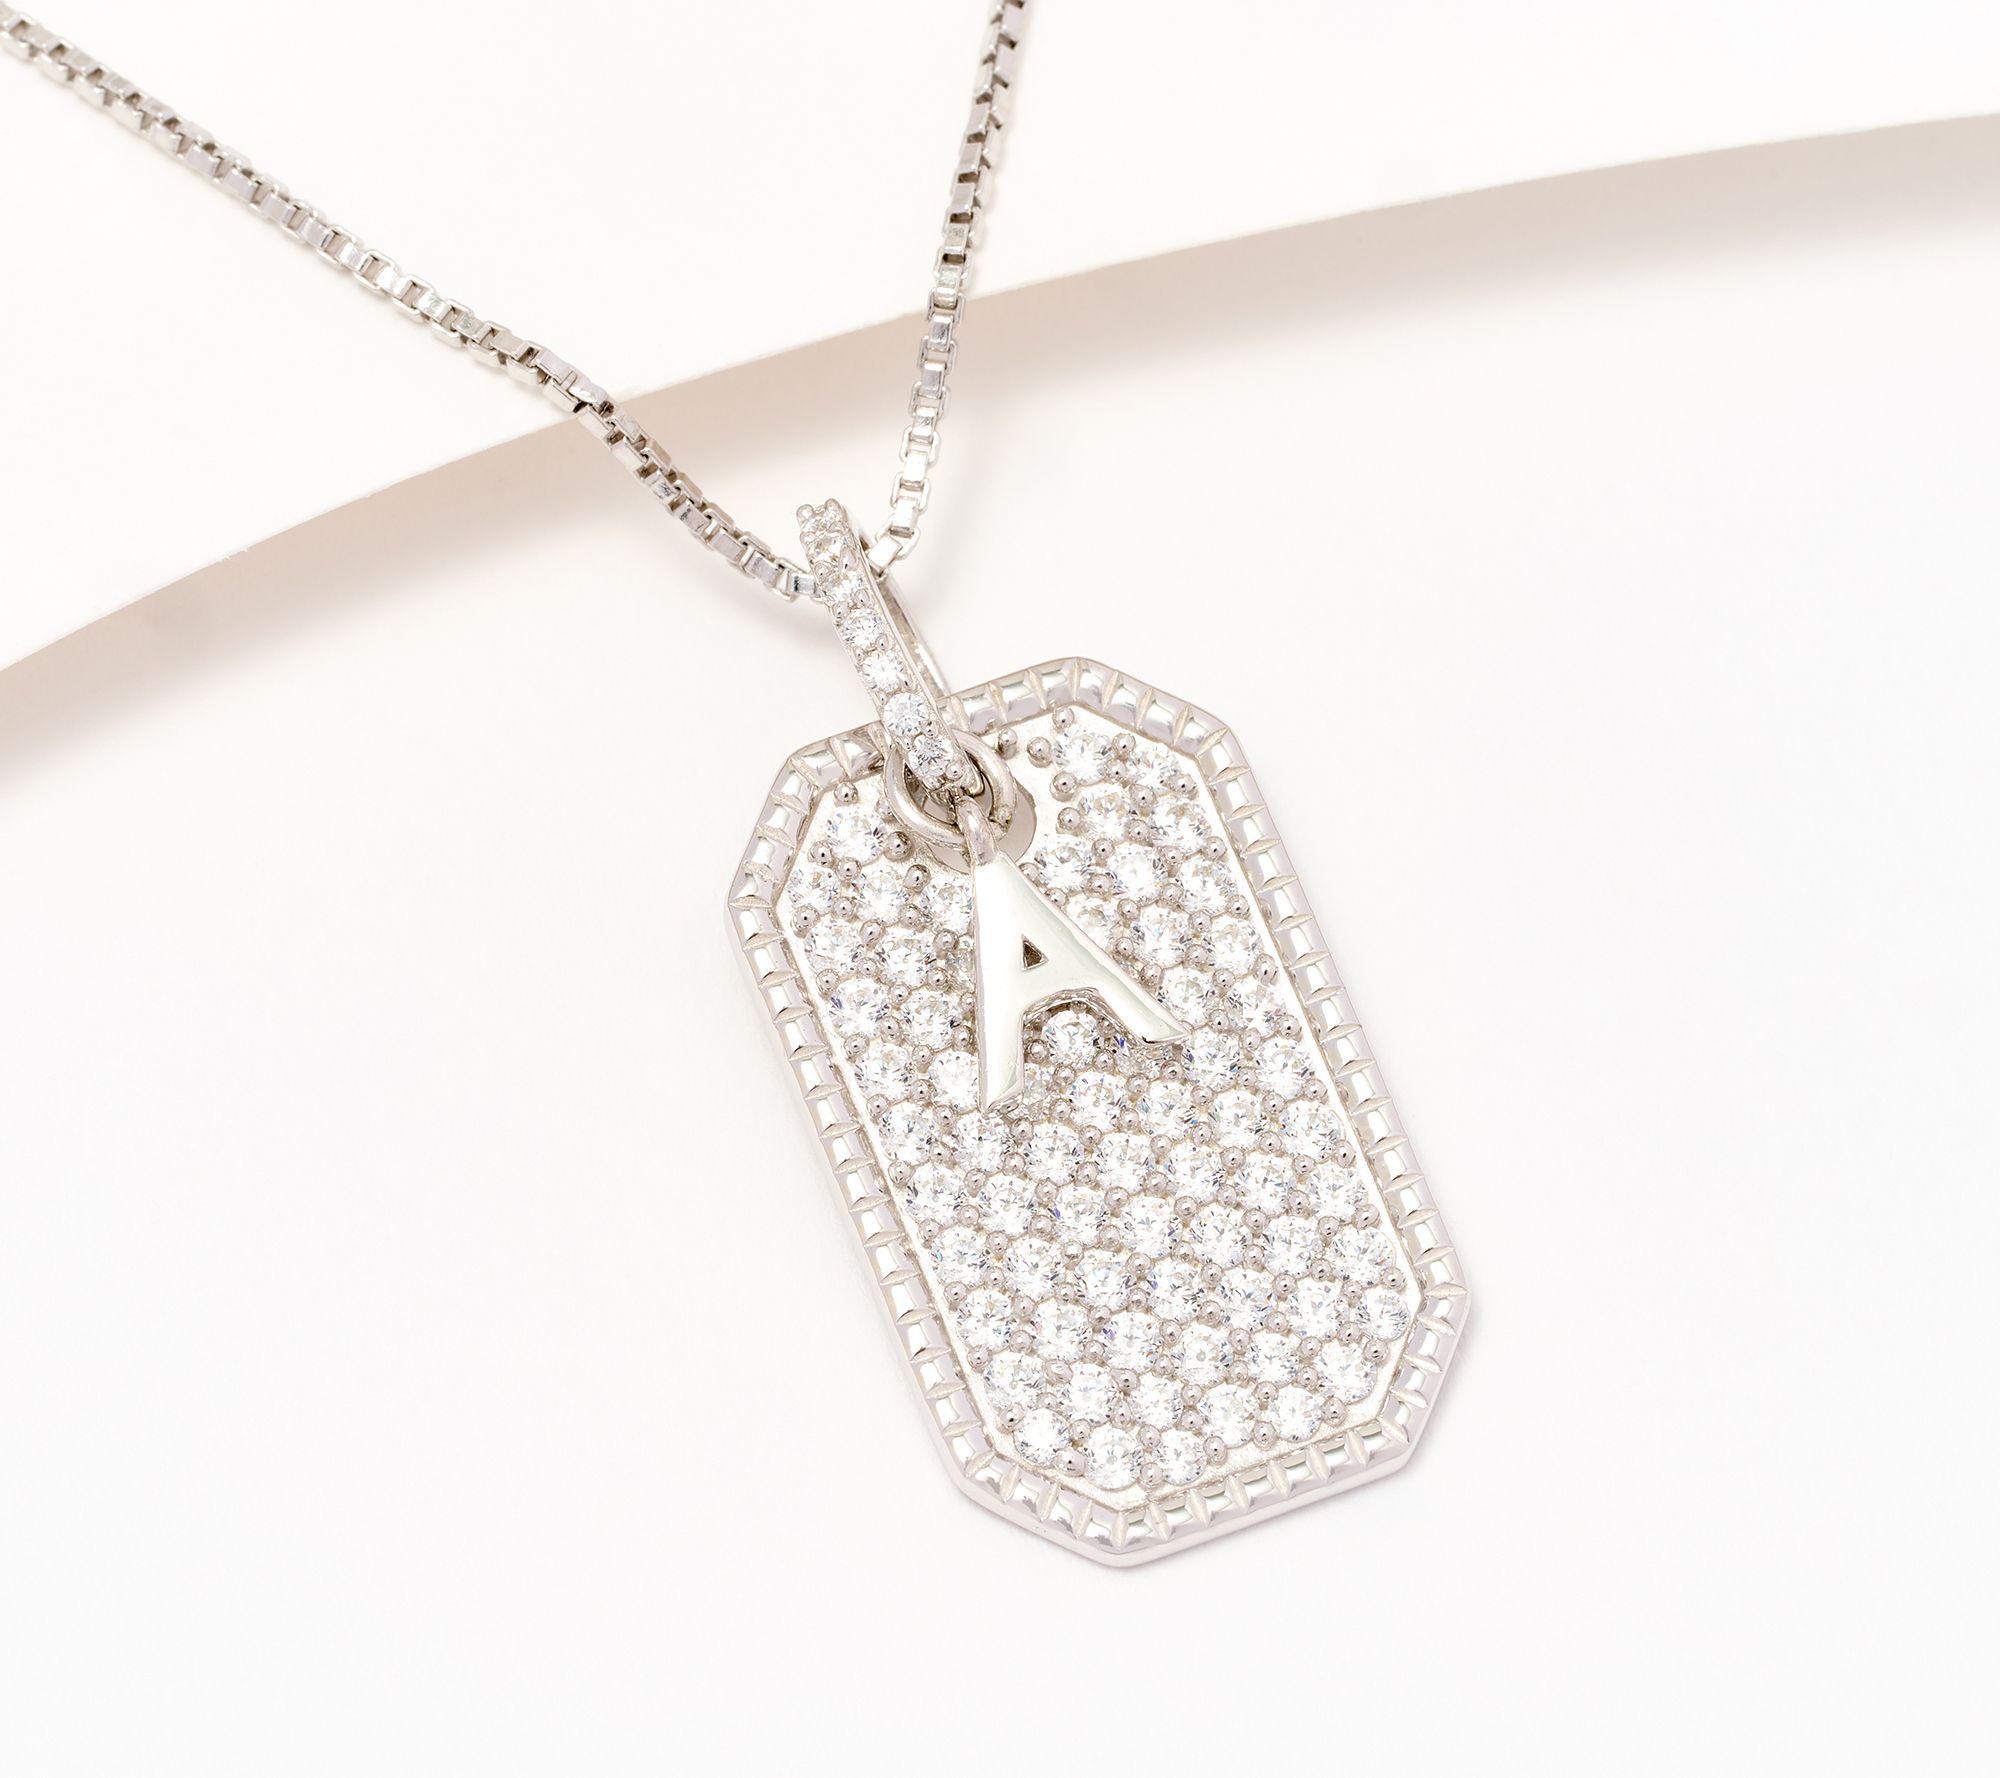 Designer Dog Tag Chain Necklace For Women Silver Plated Correct Brand Logo  Stainless Steel Fashion Gift Luxury Quality Gifts Family Friend Couple From  Jewelry99888, $6.04